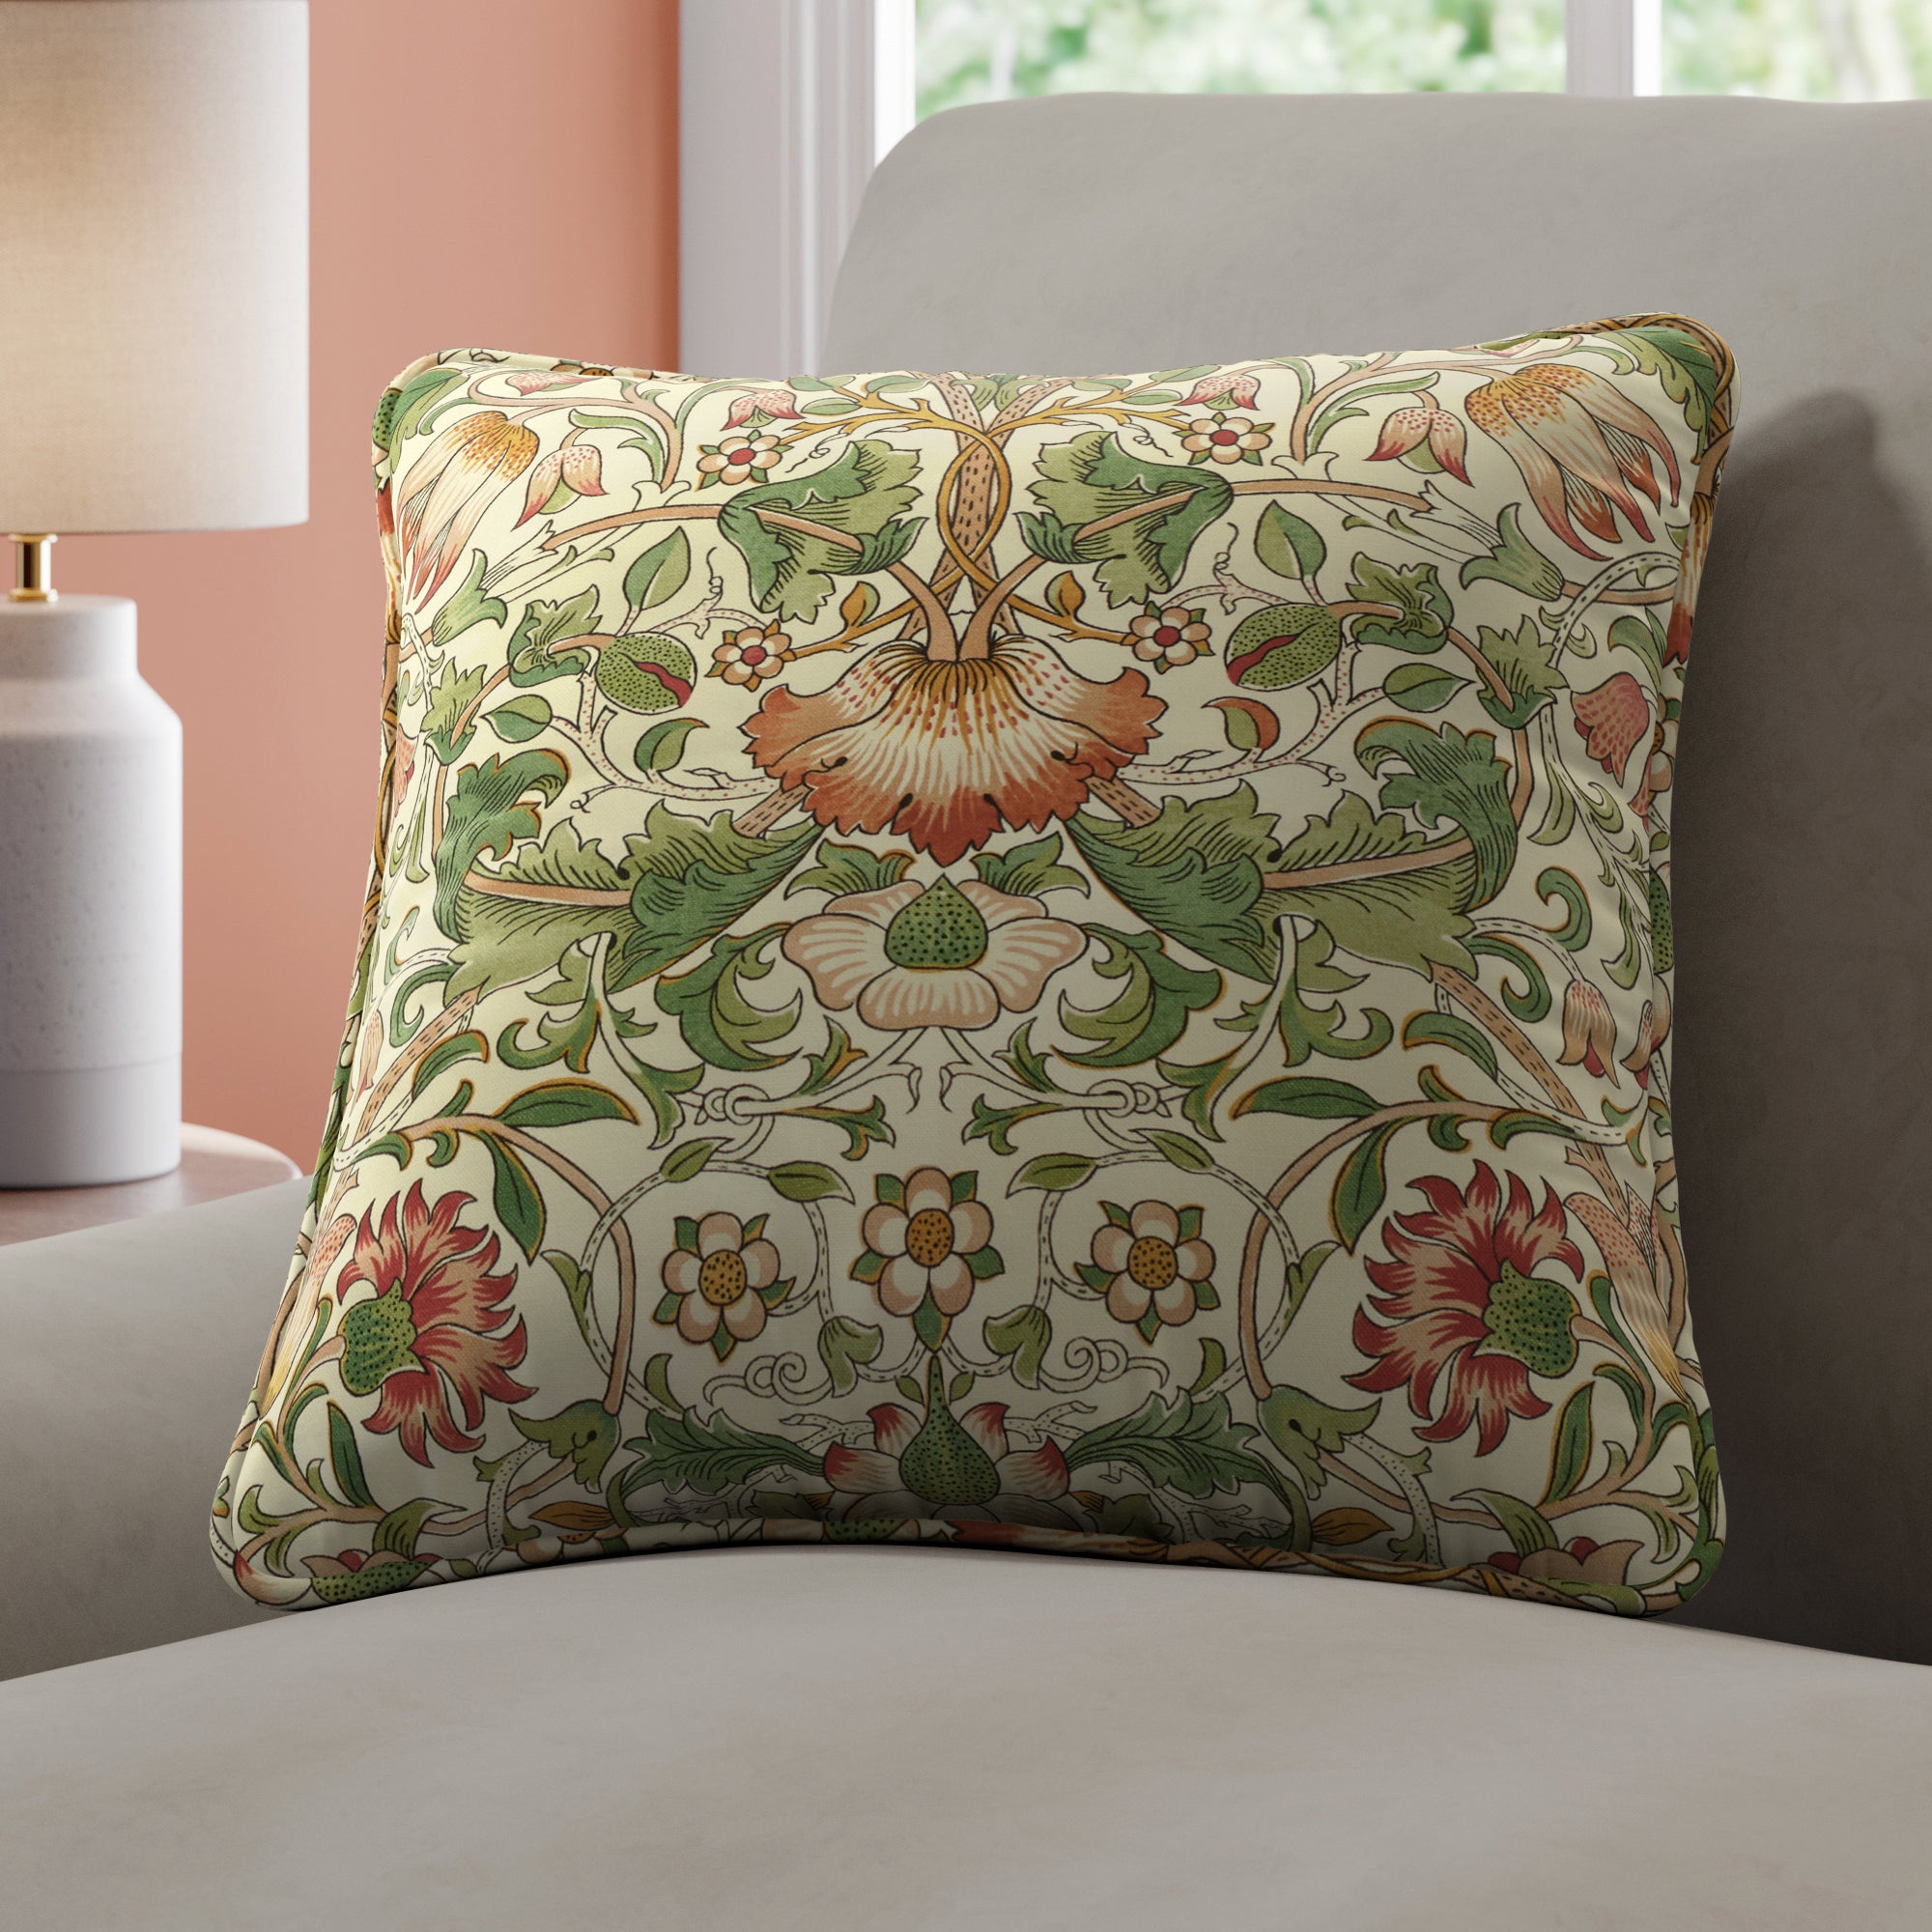 William Morris At Home Lodden Made To Order Cushion Cover